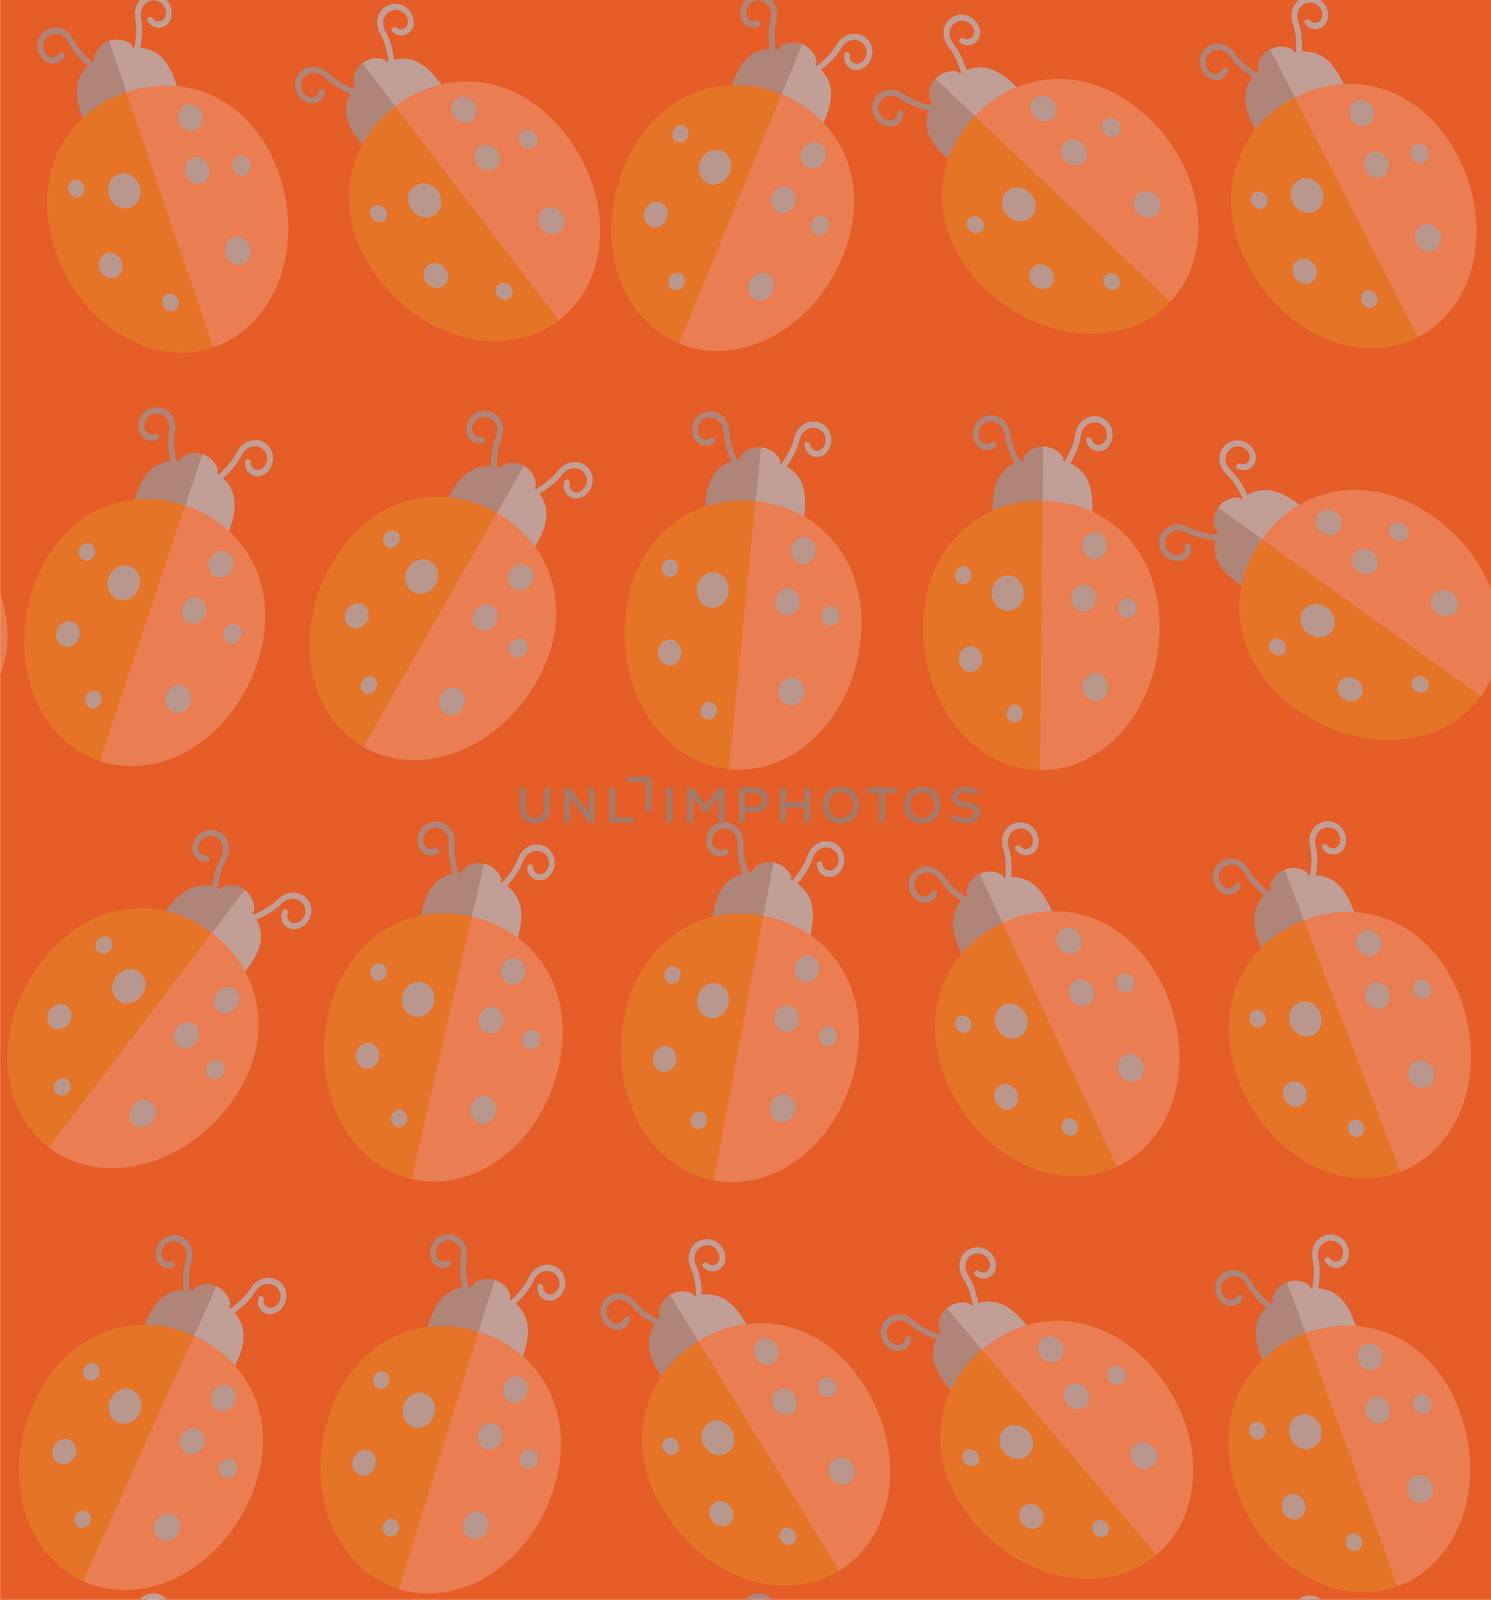 Lady-bird or ladybug pattern on light background. Cartoon illustration. Endless insect texture for textile